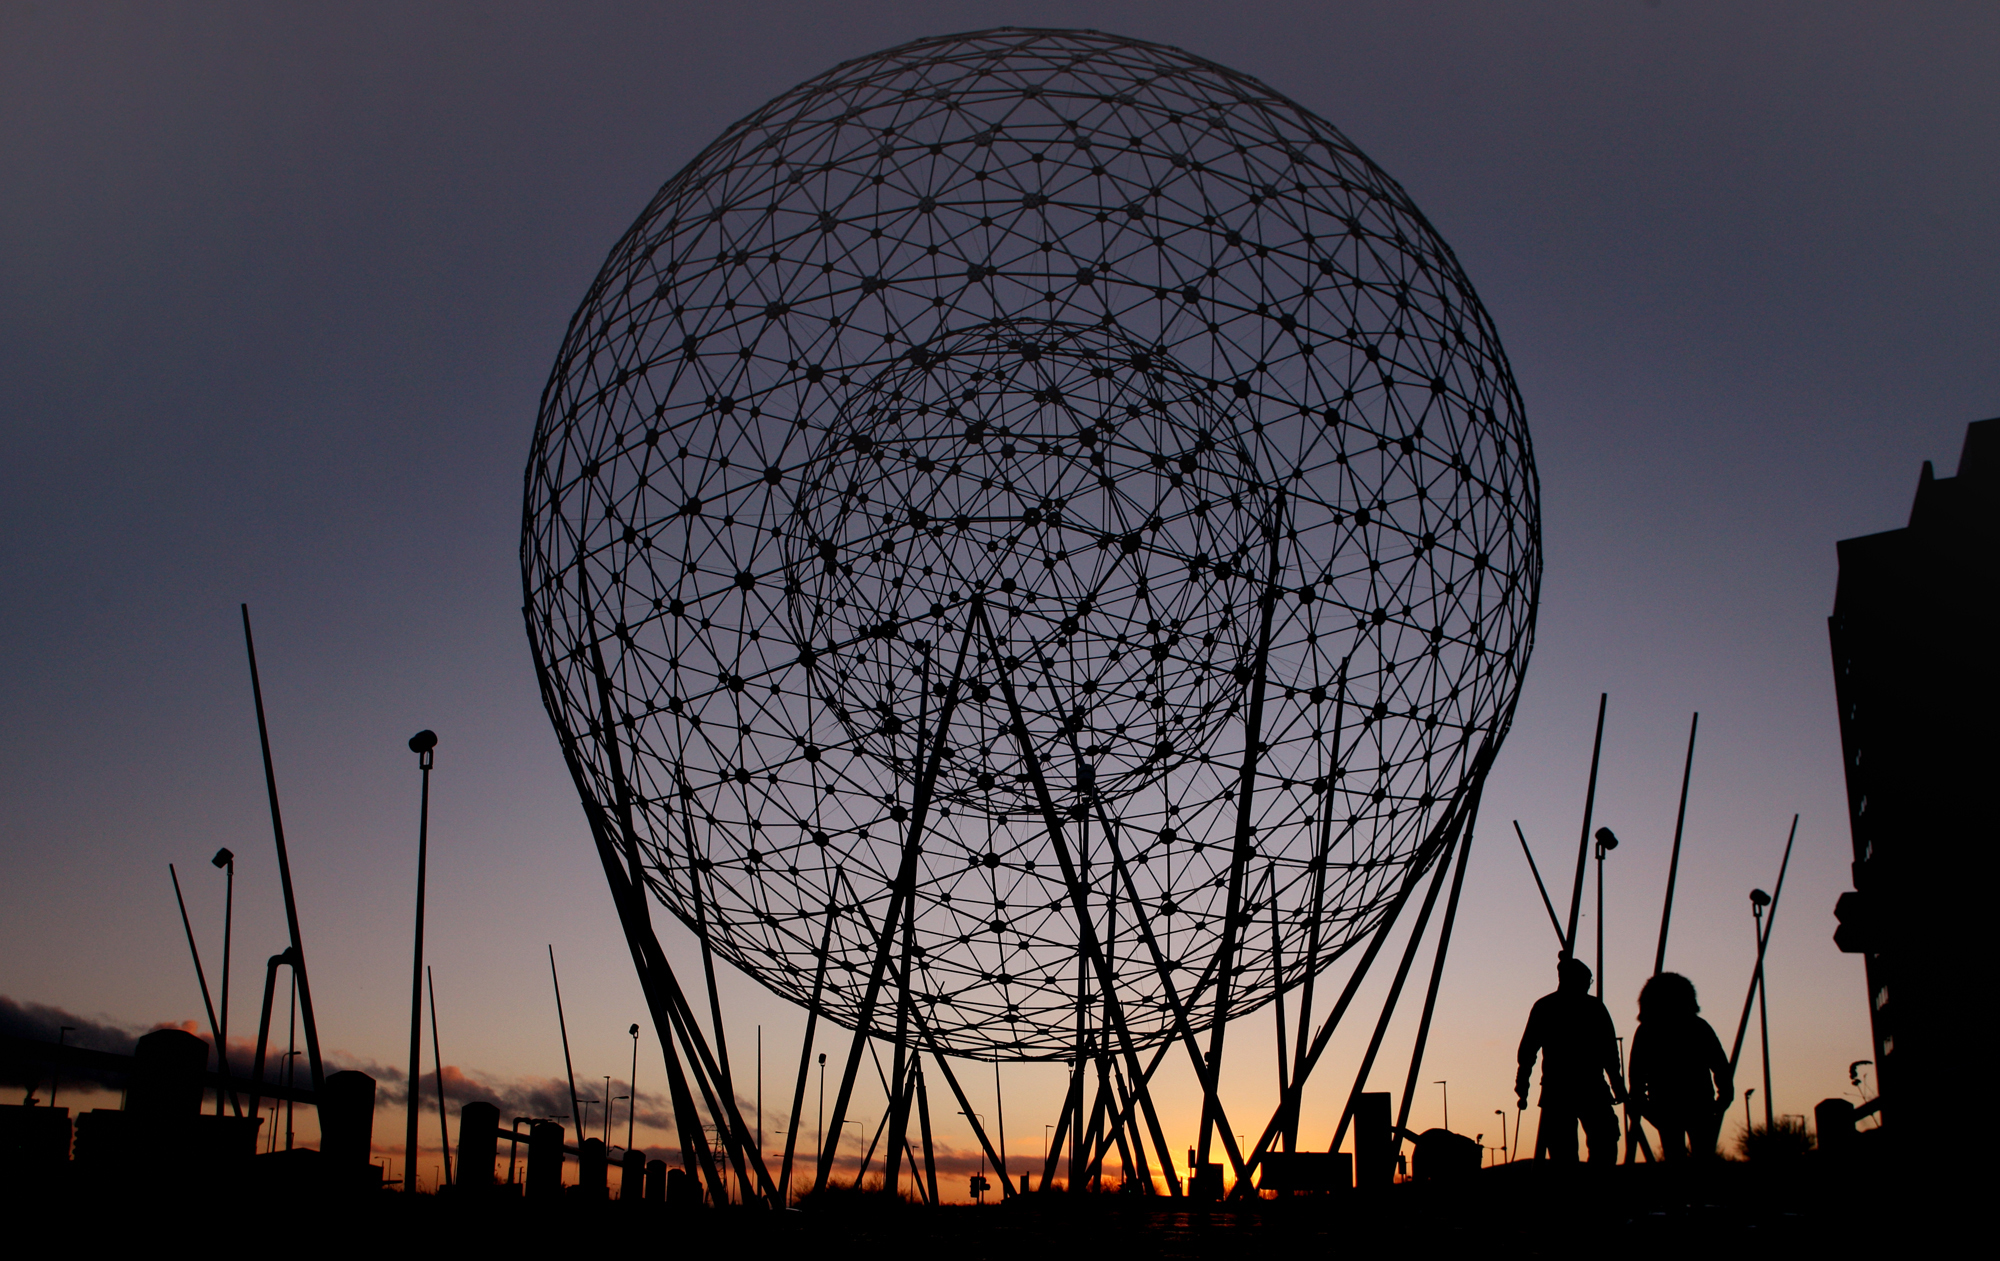 Dusk falls as a couple make their way past the Rise sculpture at Broadway roundabout